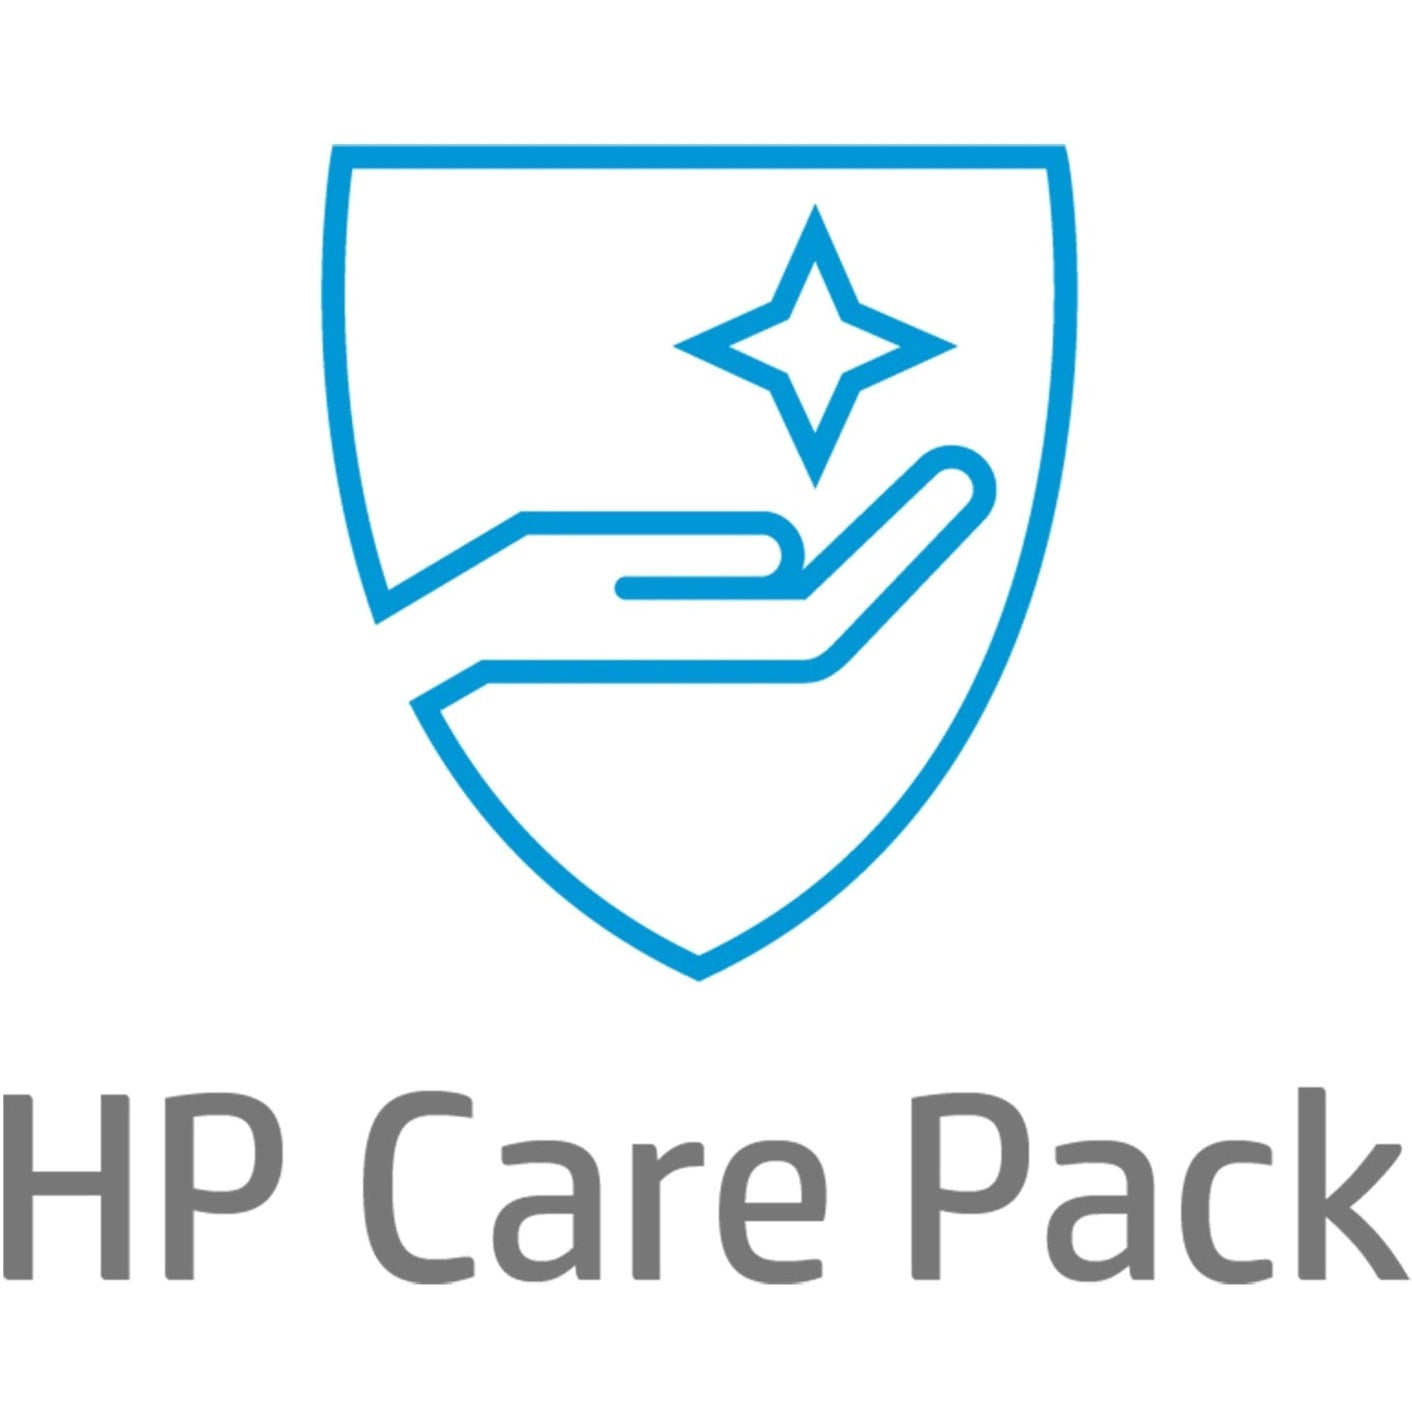 HP Care Pack - Extended Service - 3 Year - Service (U9BA4E)